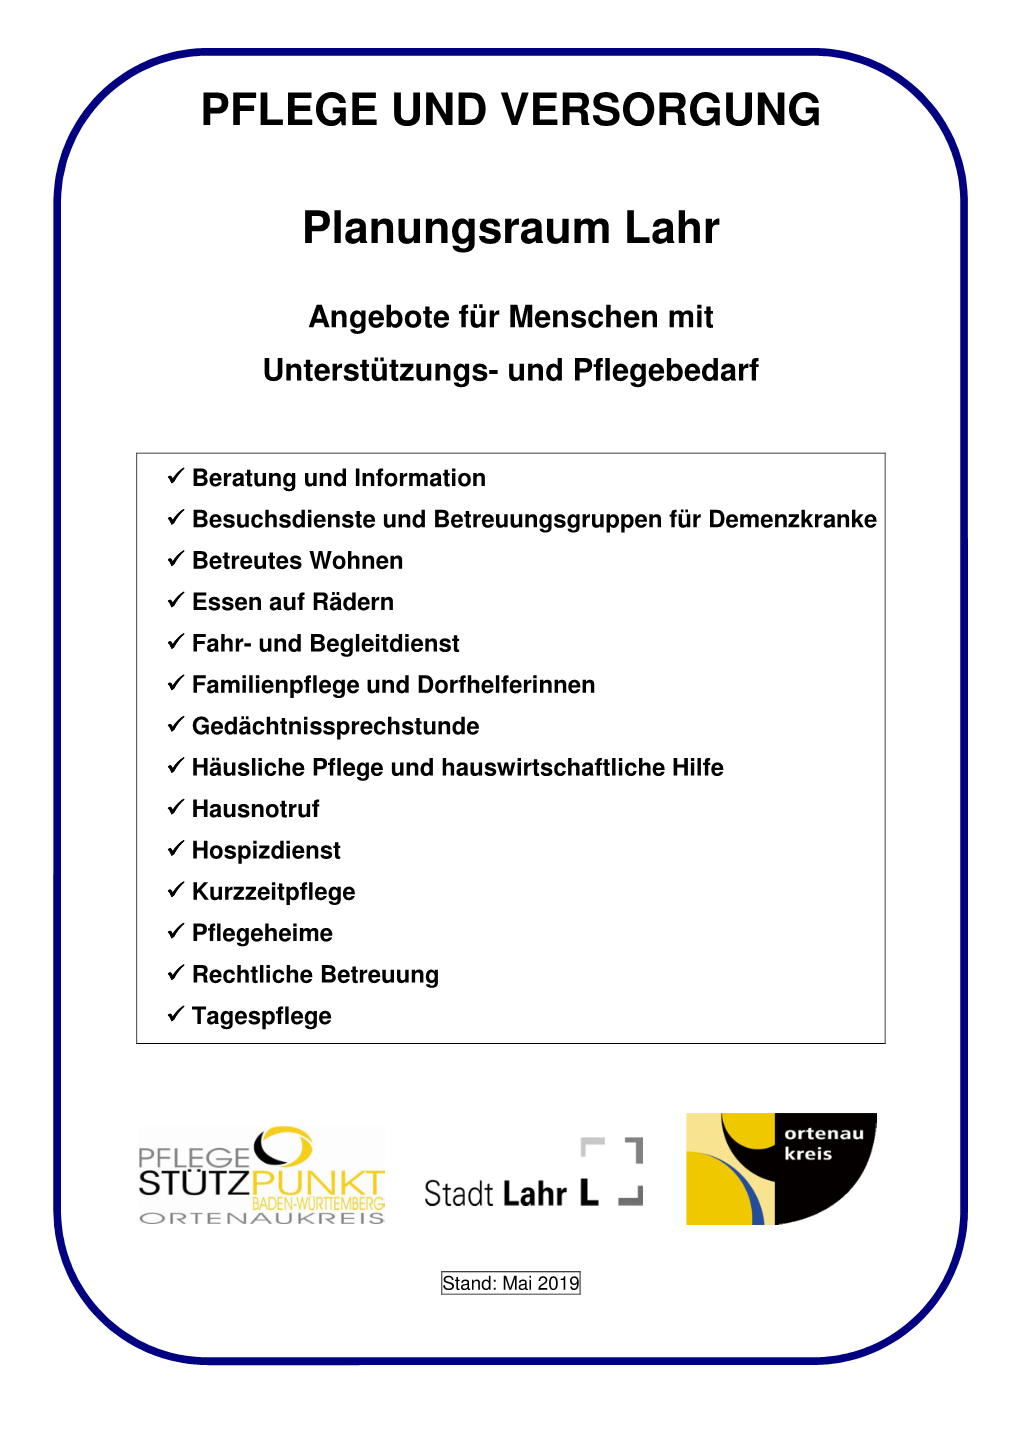 09.01.2019Lahr-Flyer Stand Mai 2019